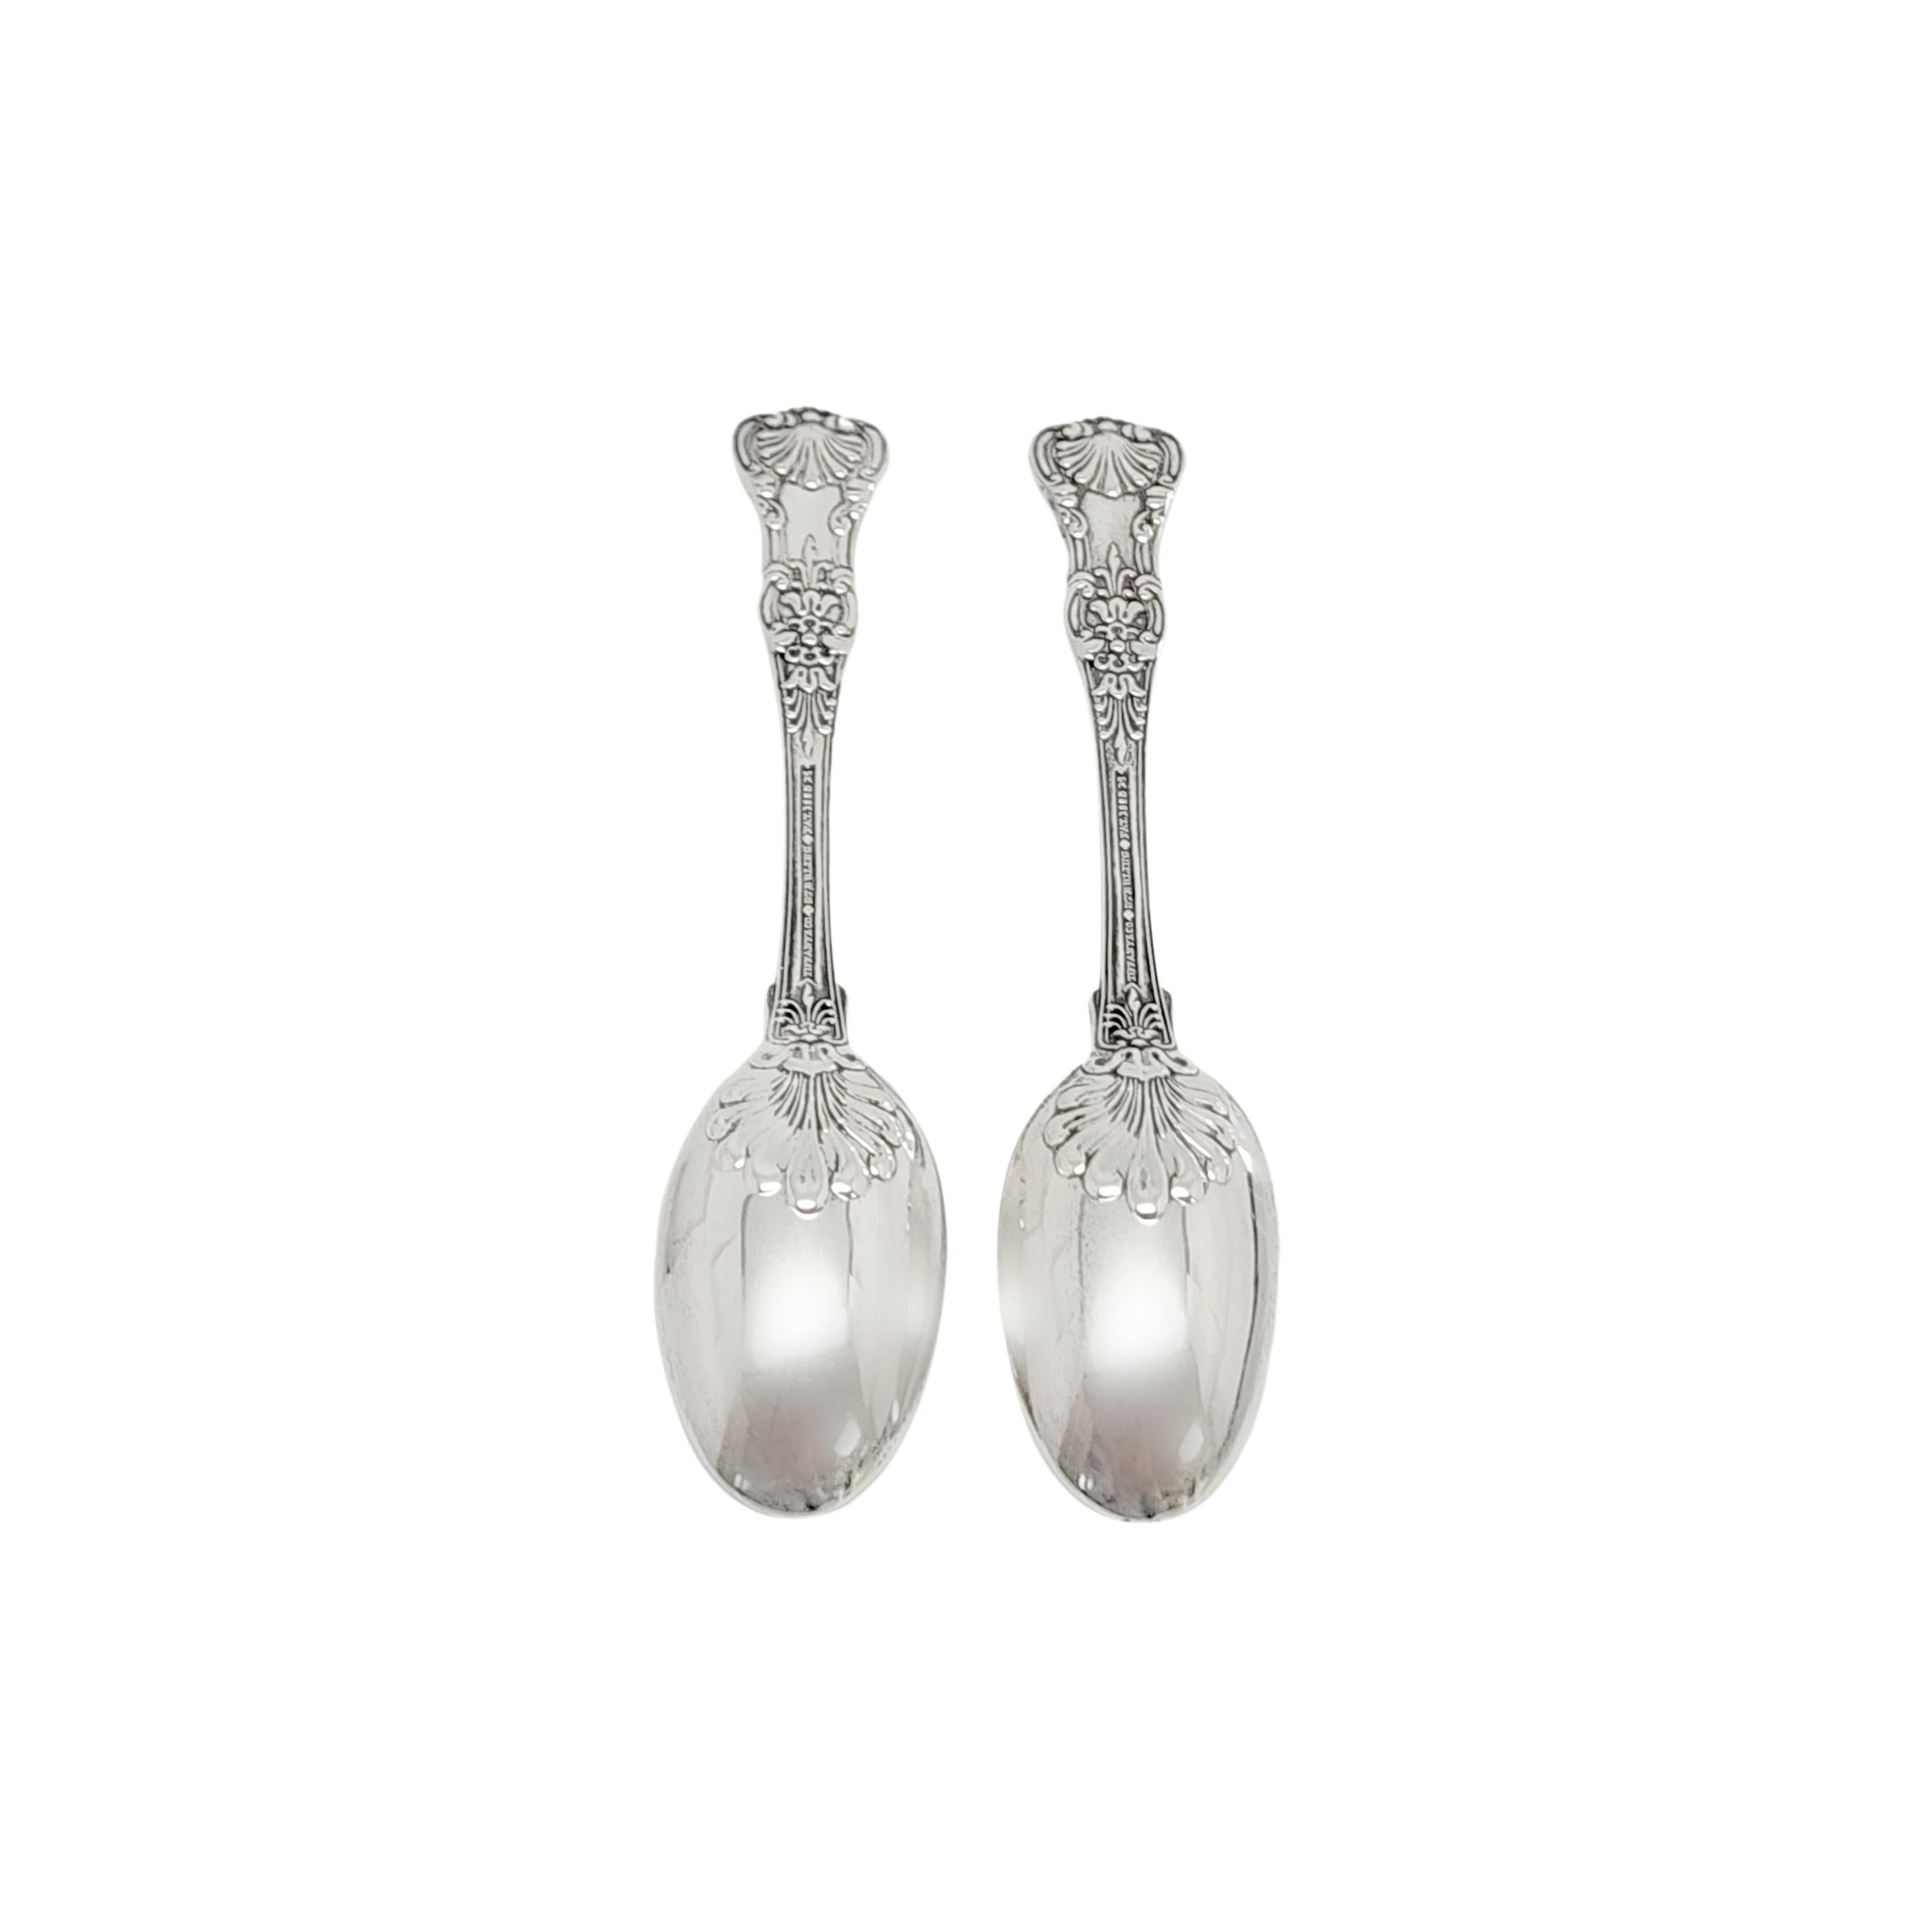 Set of 2 Tiffany & Co Sterling Silver English King Demitasse Spoons 3